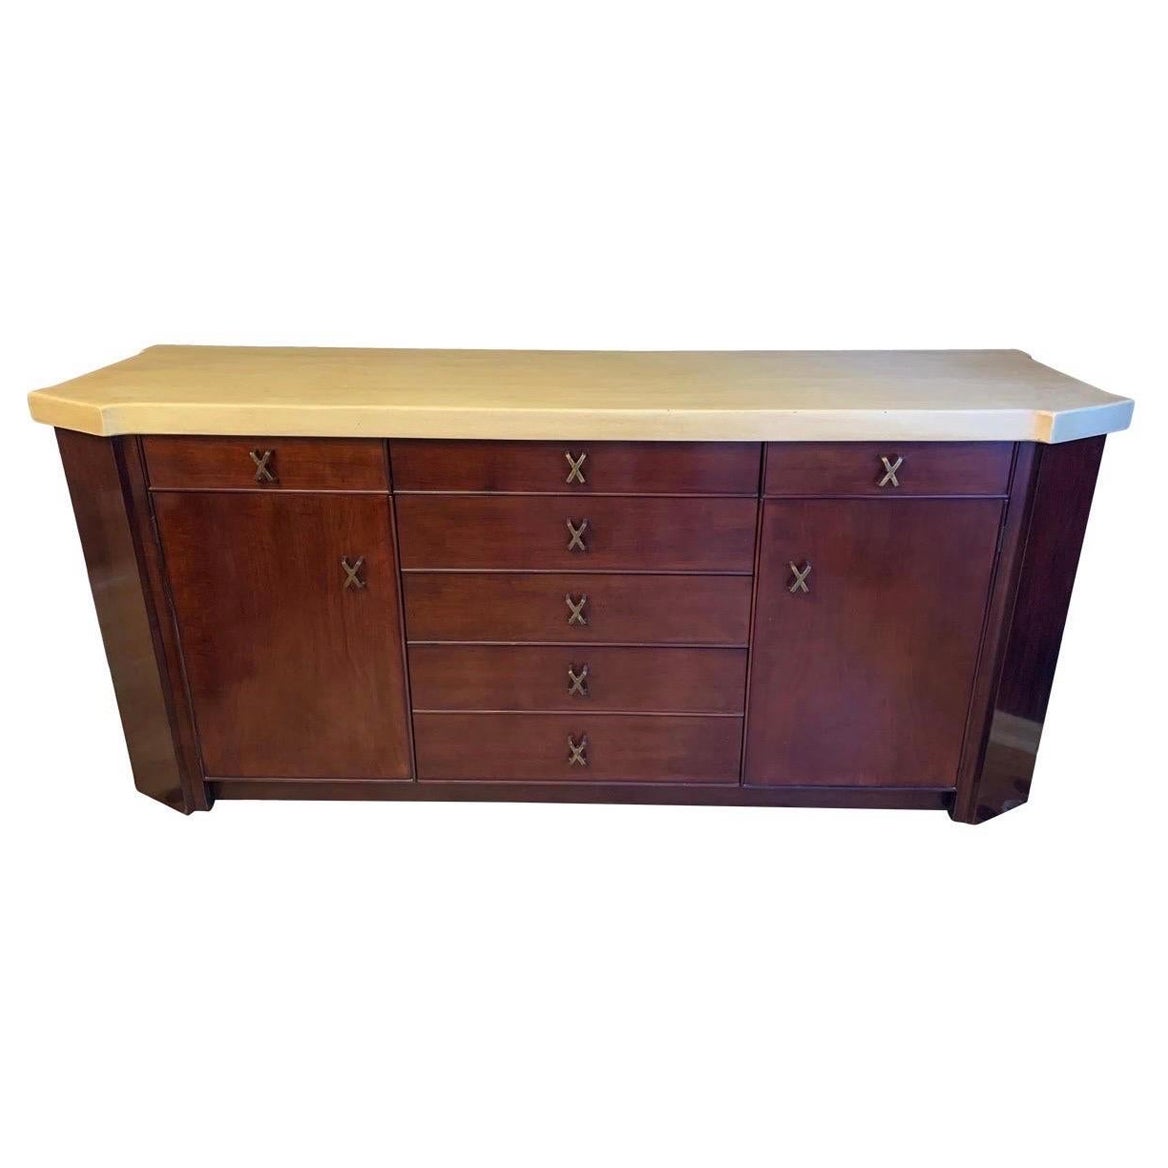 1950s Paul Frankl for Johnson Furniture Co. Cork and Mahogany Credenza Buffet For Sale